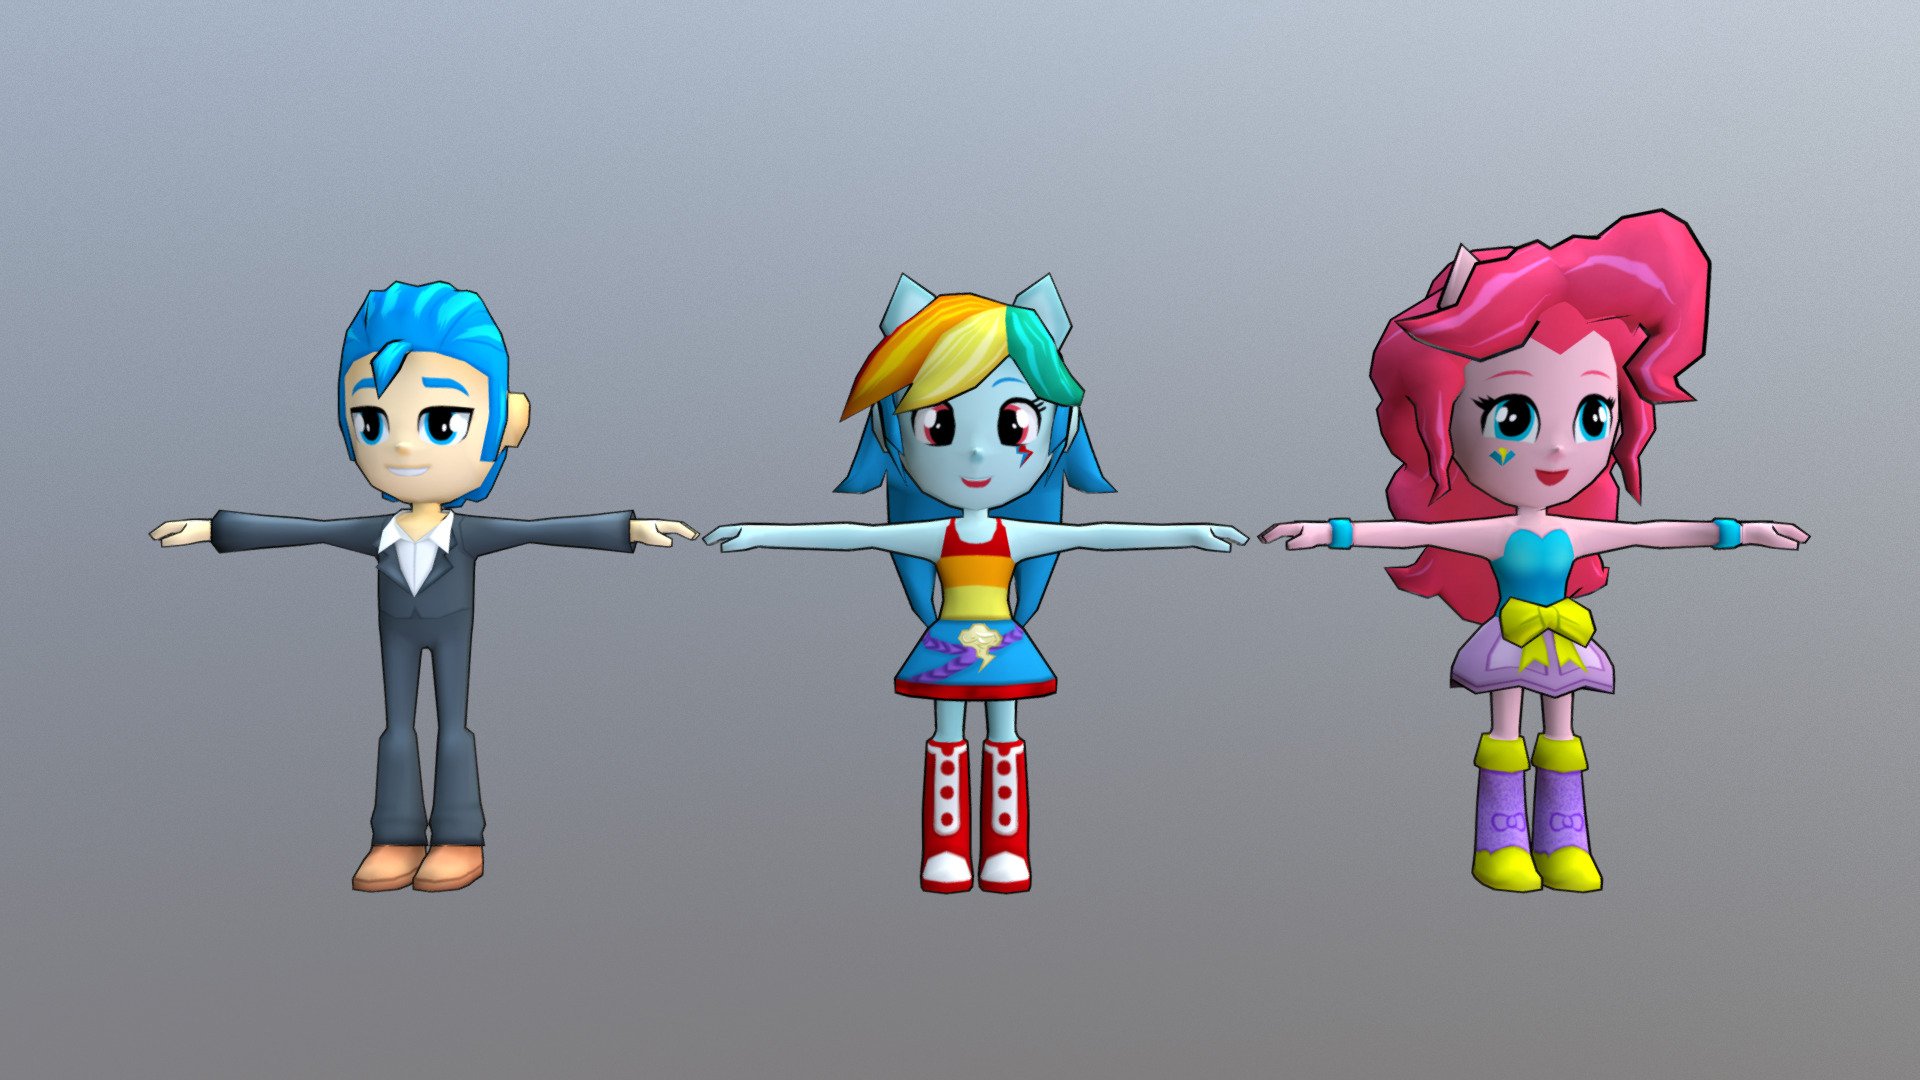 3 Low poly characters